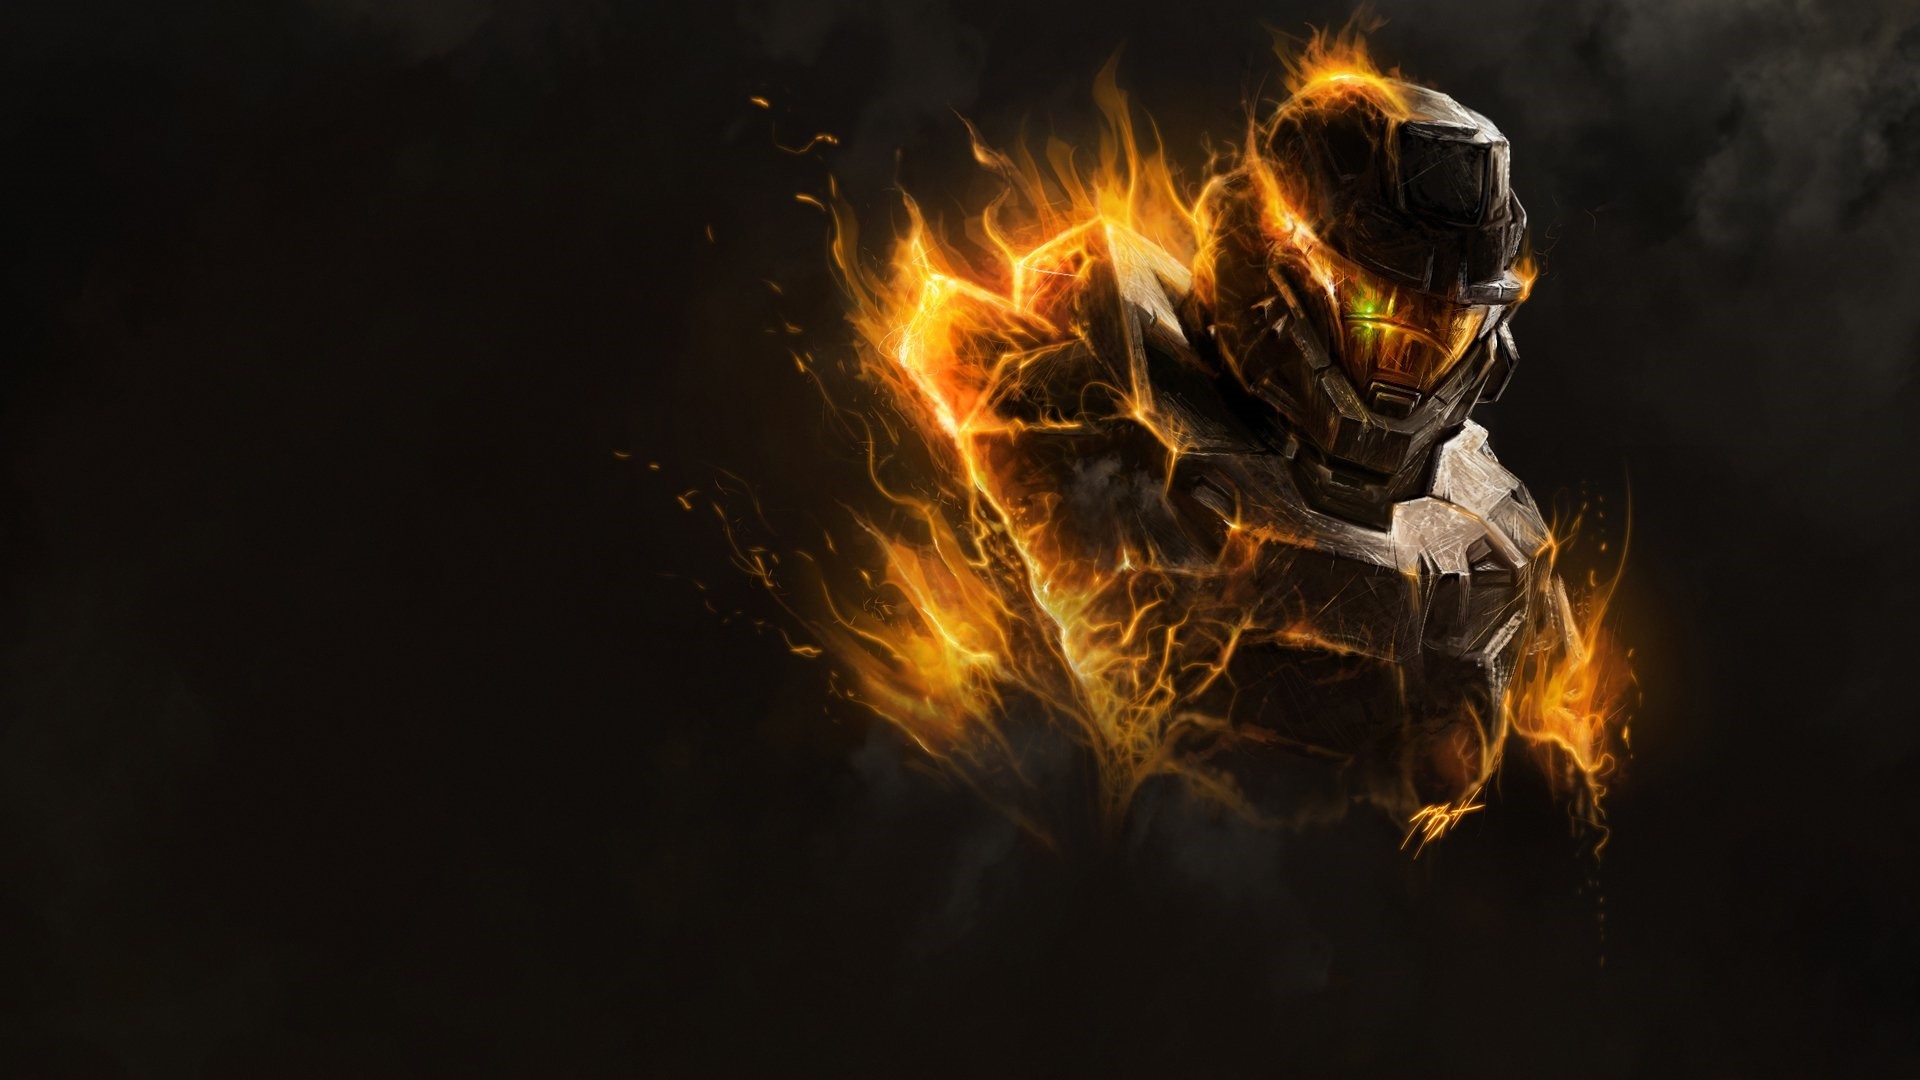 1920x1080 Halo 5 Guardians Master Chief Wallpaper High Quality To Download Wallpaper